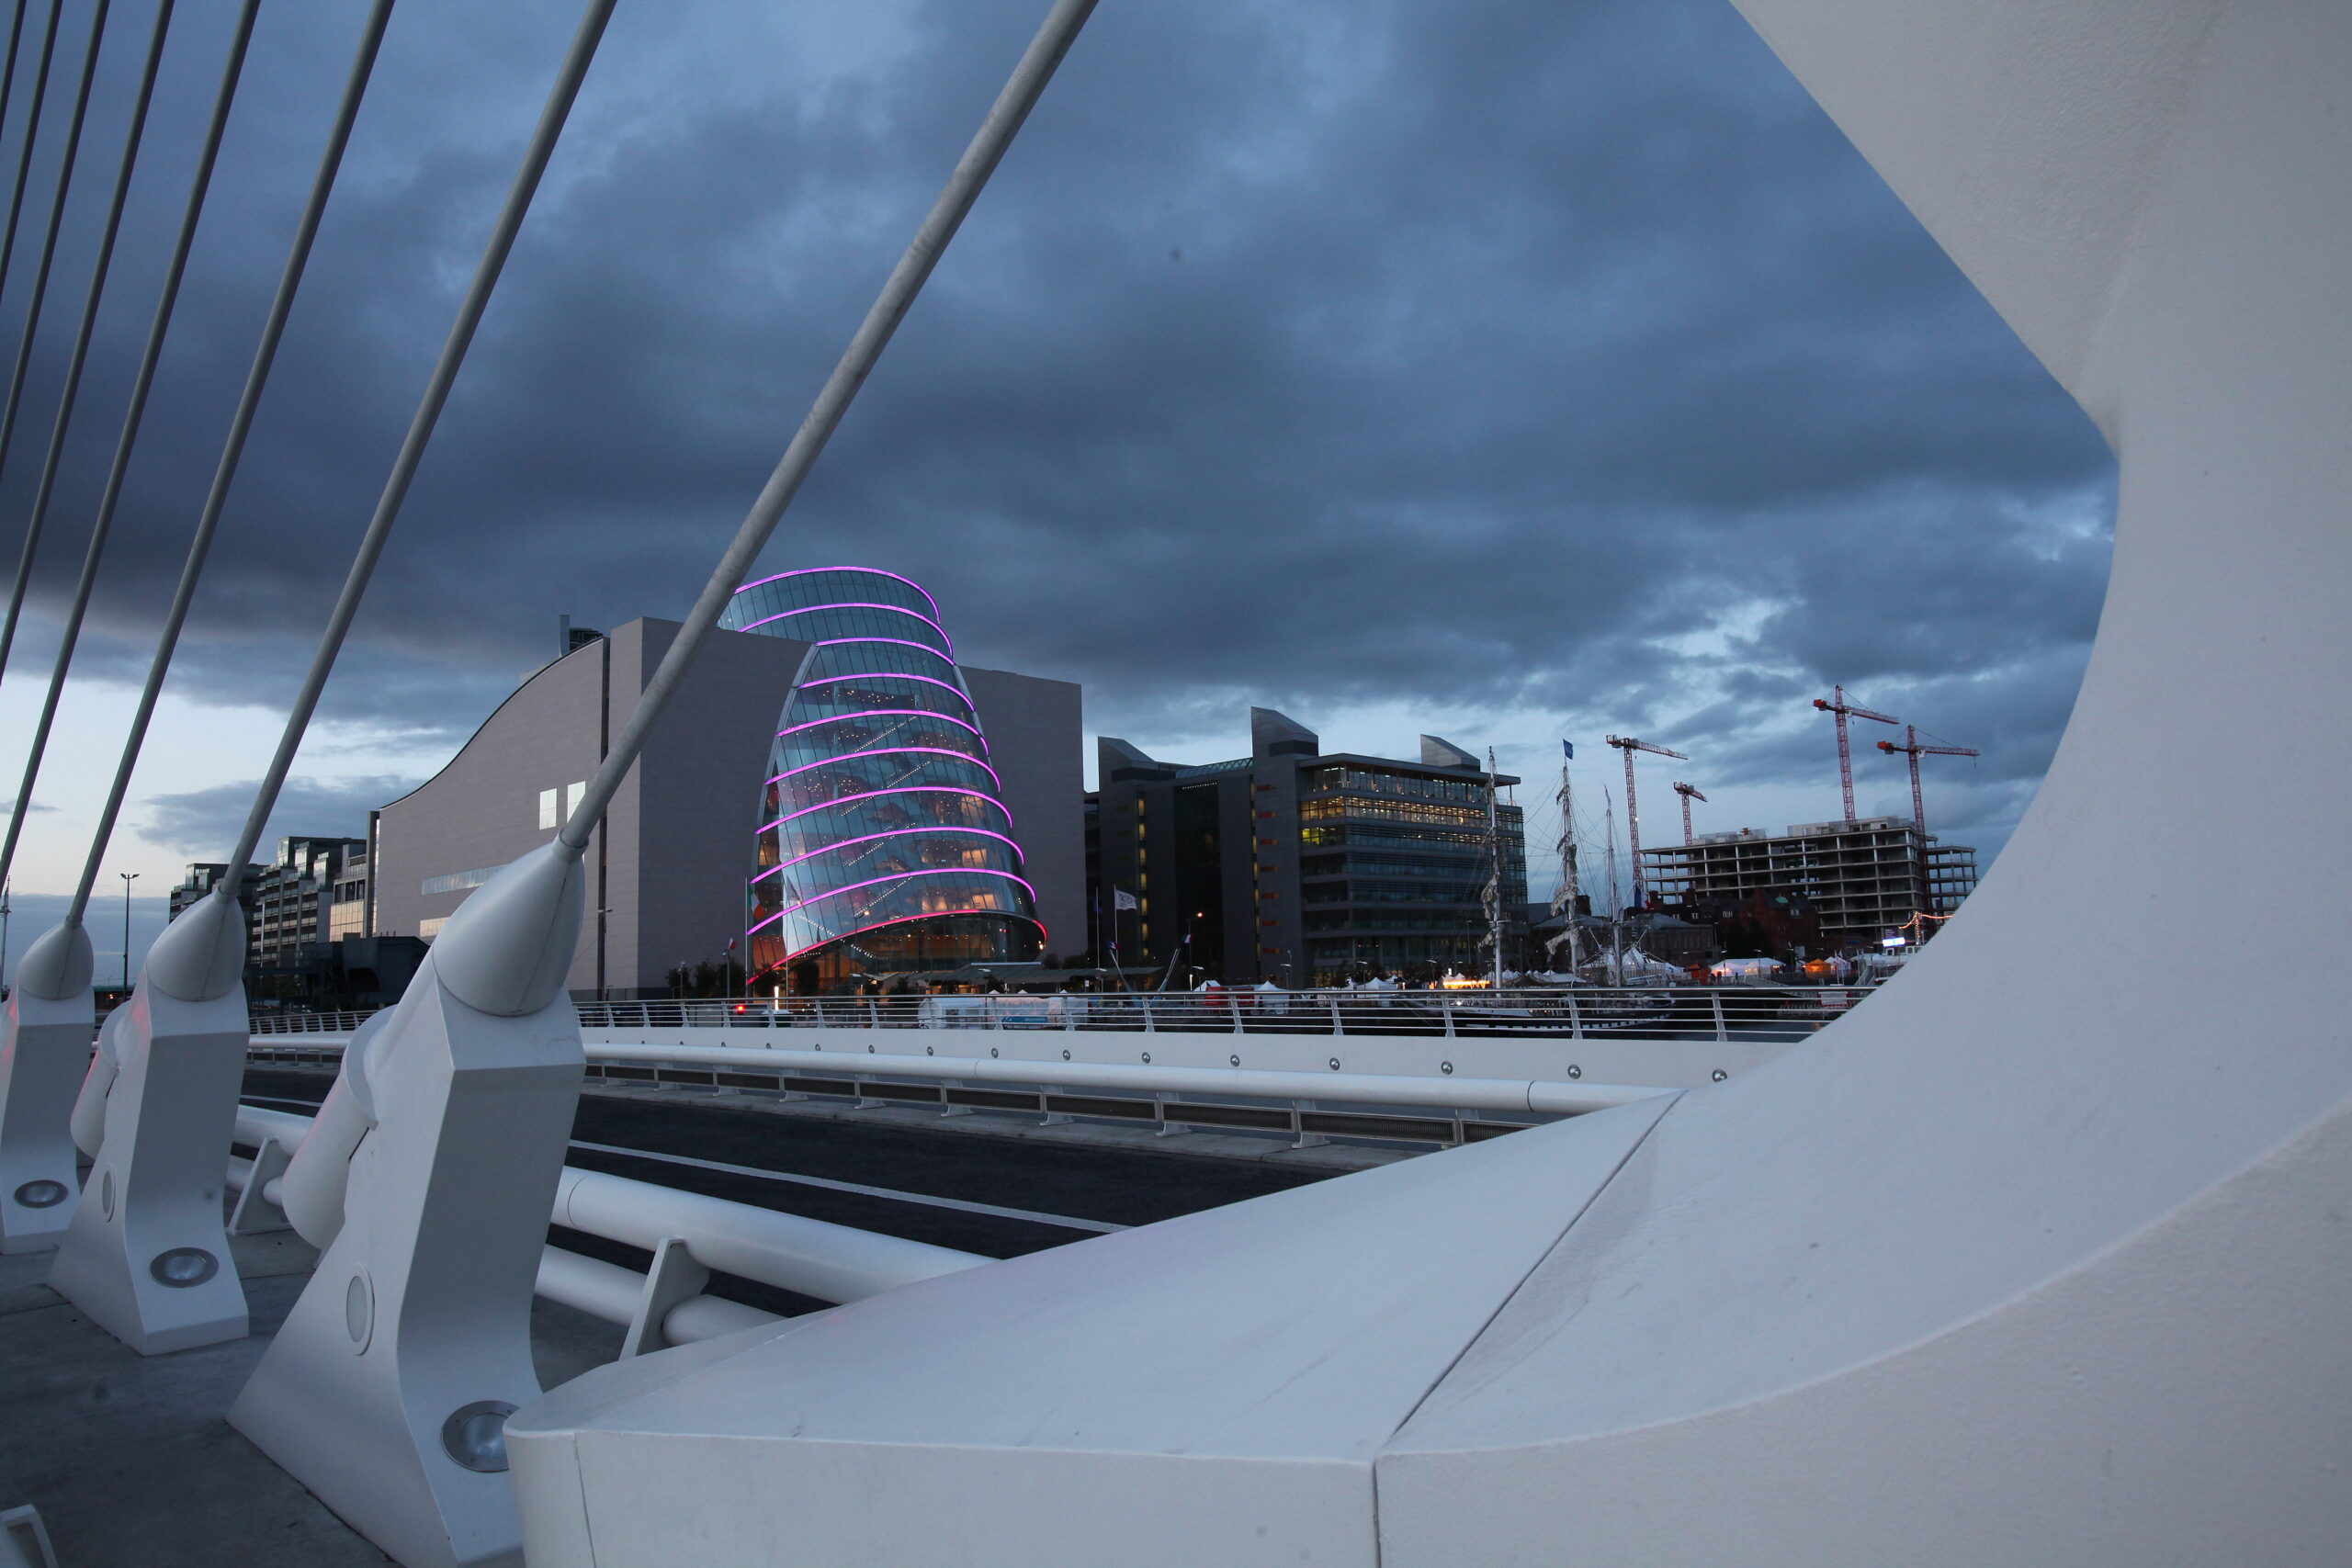 The CCD exterior front angle, sitting on the docks of the Liffey